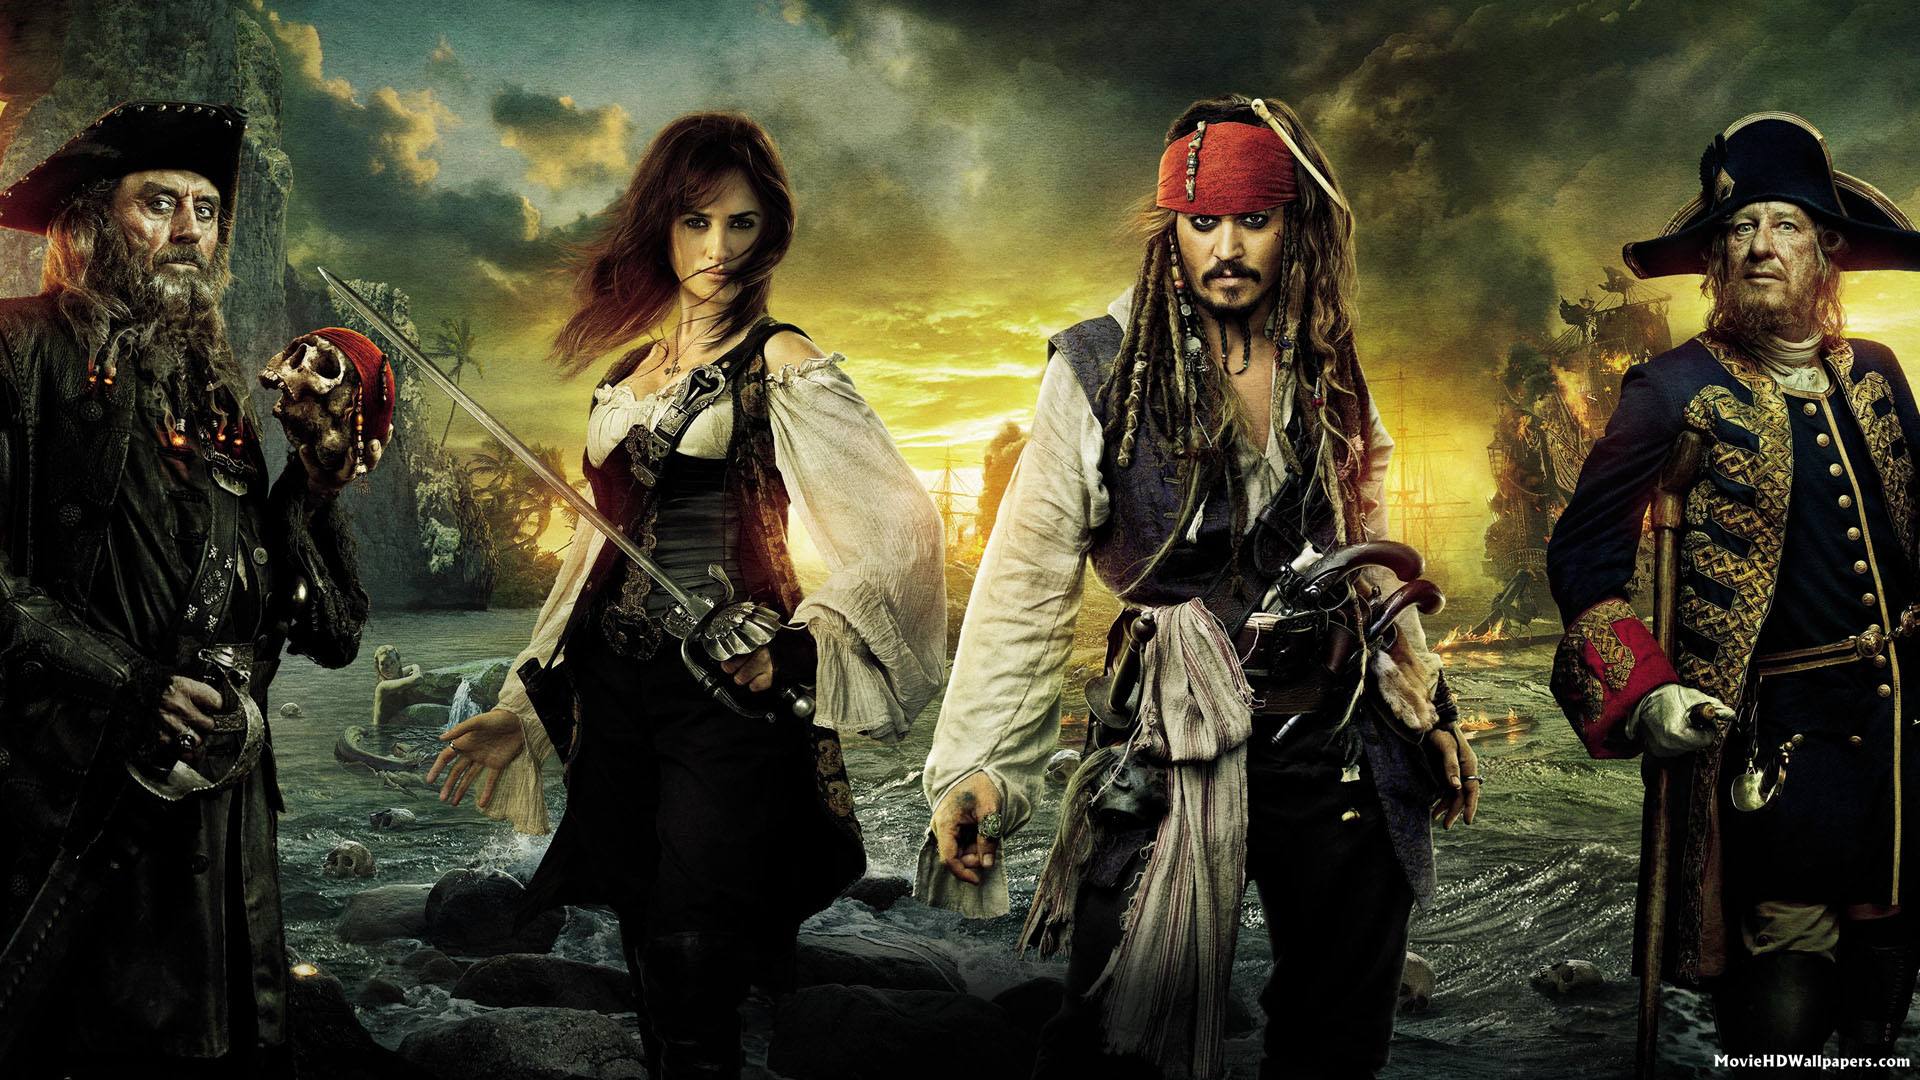 Pirates of the Caribbean On Stranger Tides Cast | Movie HD Wallpapers